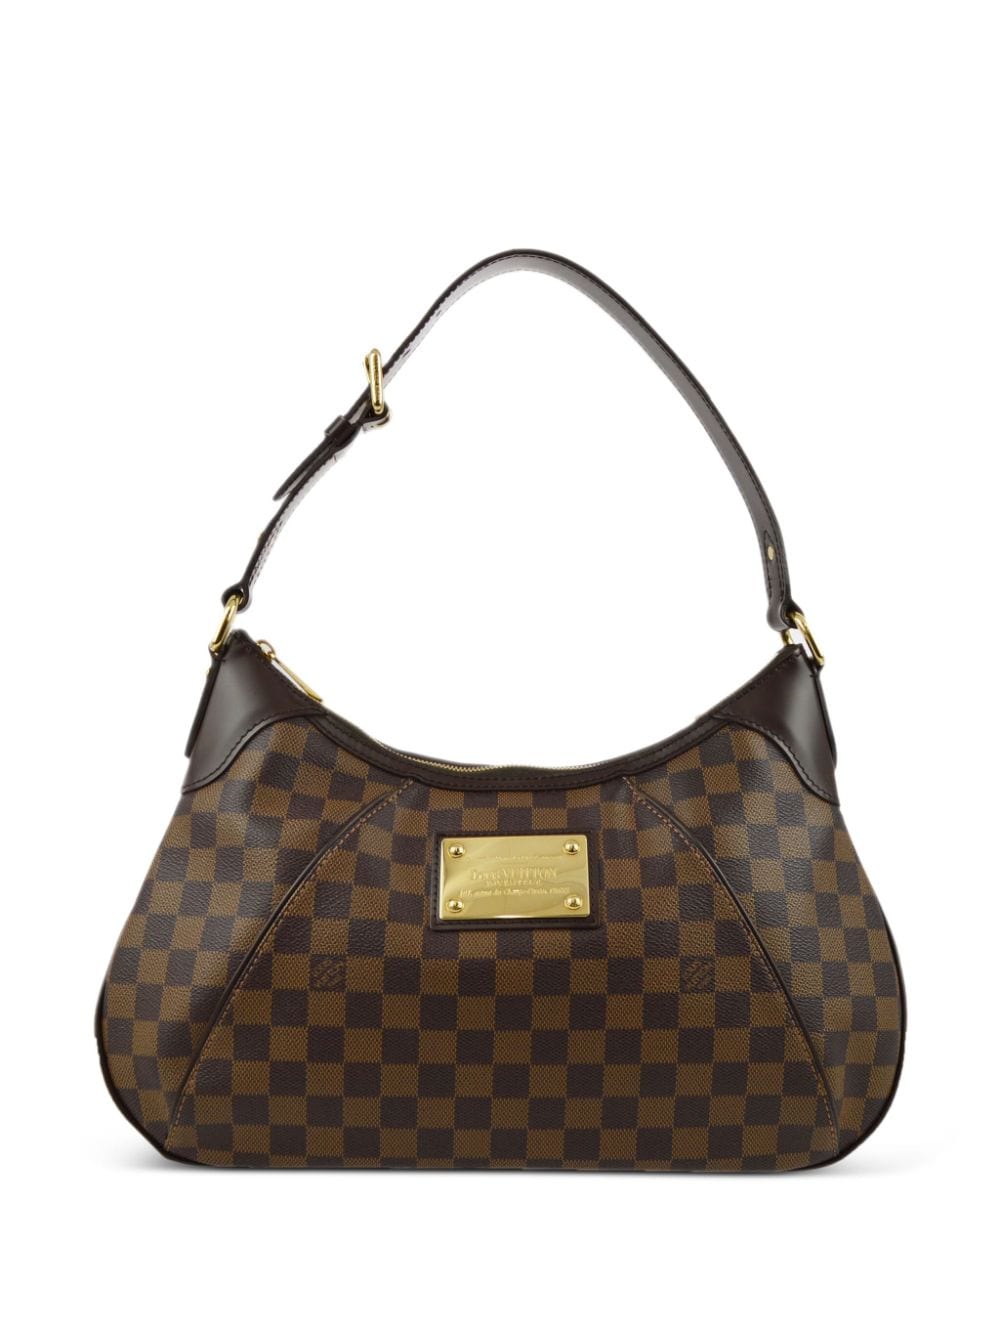 Pre-owned Louis Vuitton 2008 Thames Gm Shoulder Bag In Brown